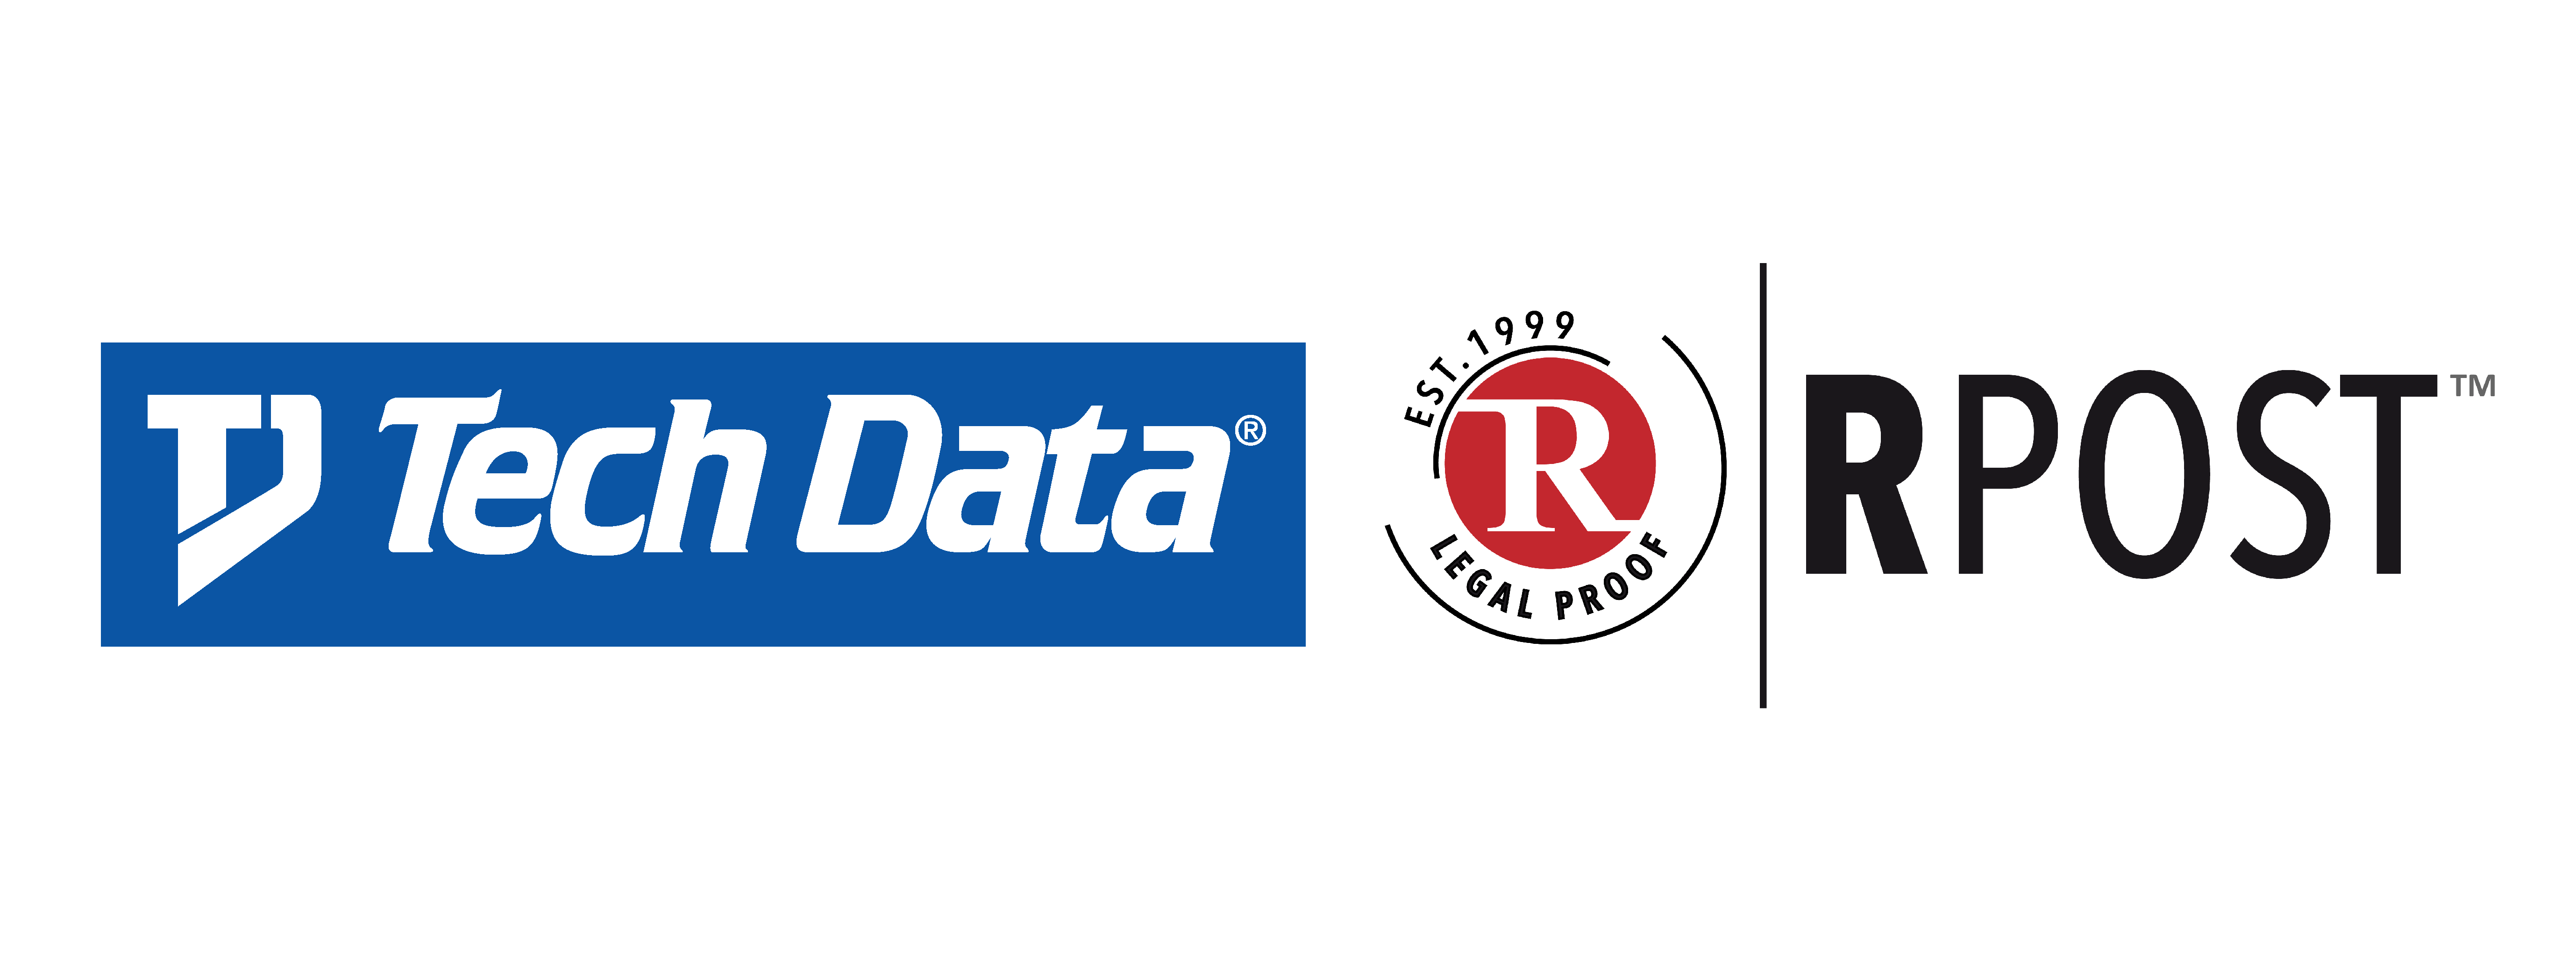 RPost, Tech Data, and Dell, Now Better Together